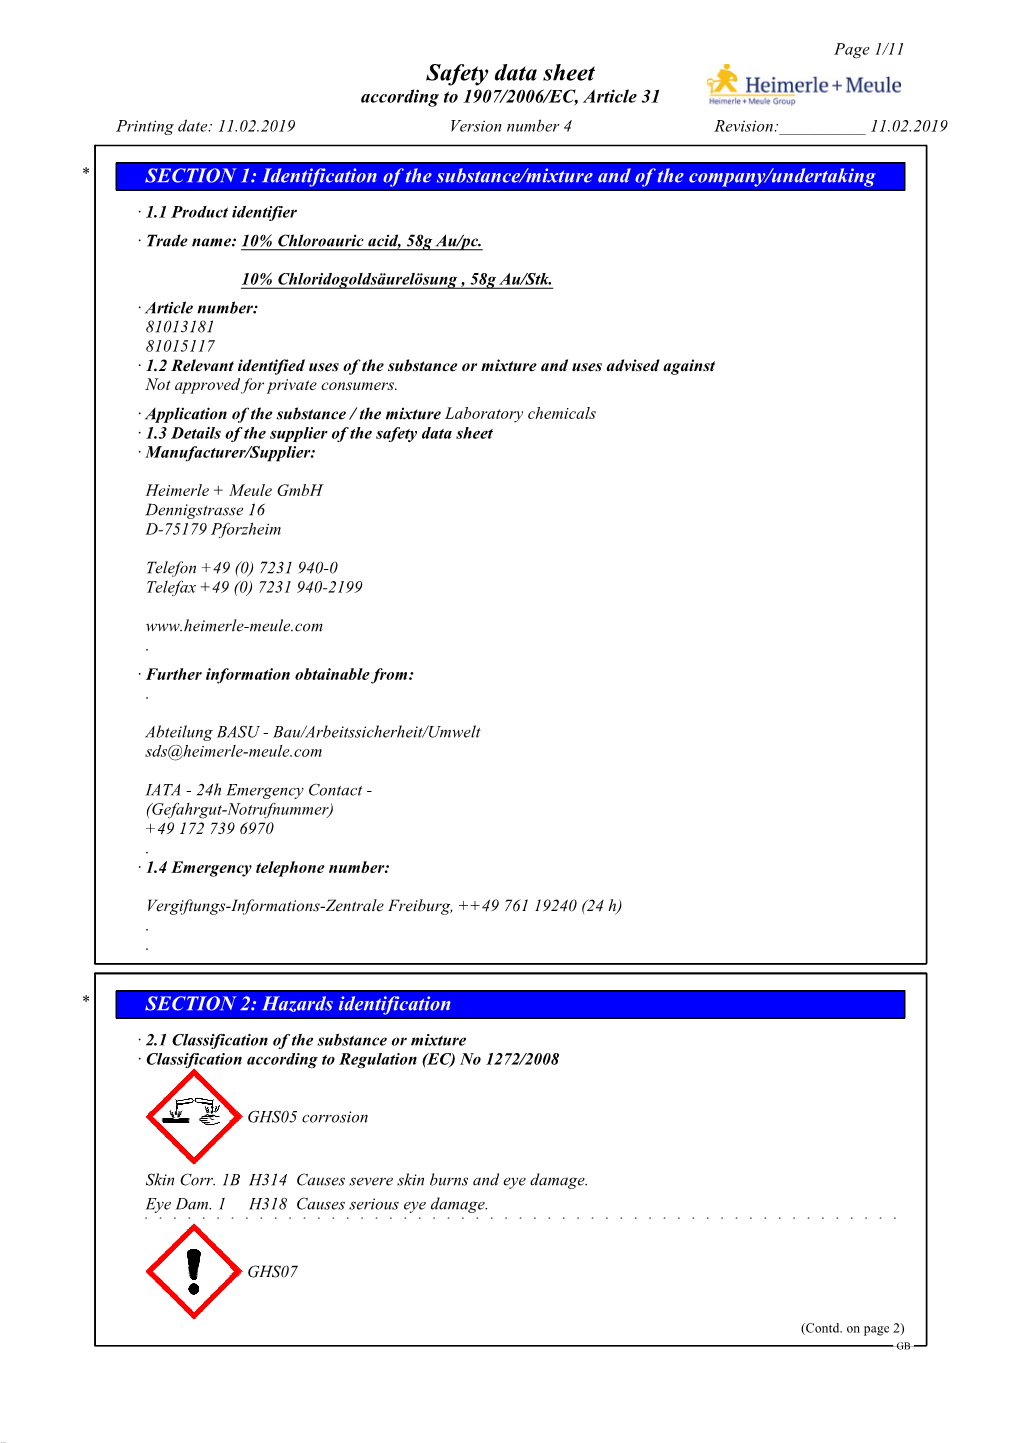 Safety Data Sheet According to 1907/2006/EC, Article 31 Printing Date: 11.02.2019 Version Number 4 Revision:______11.02.2019